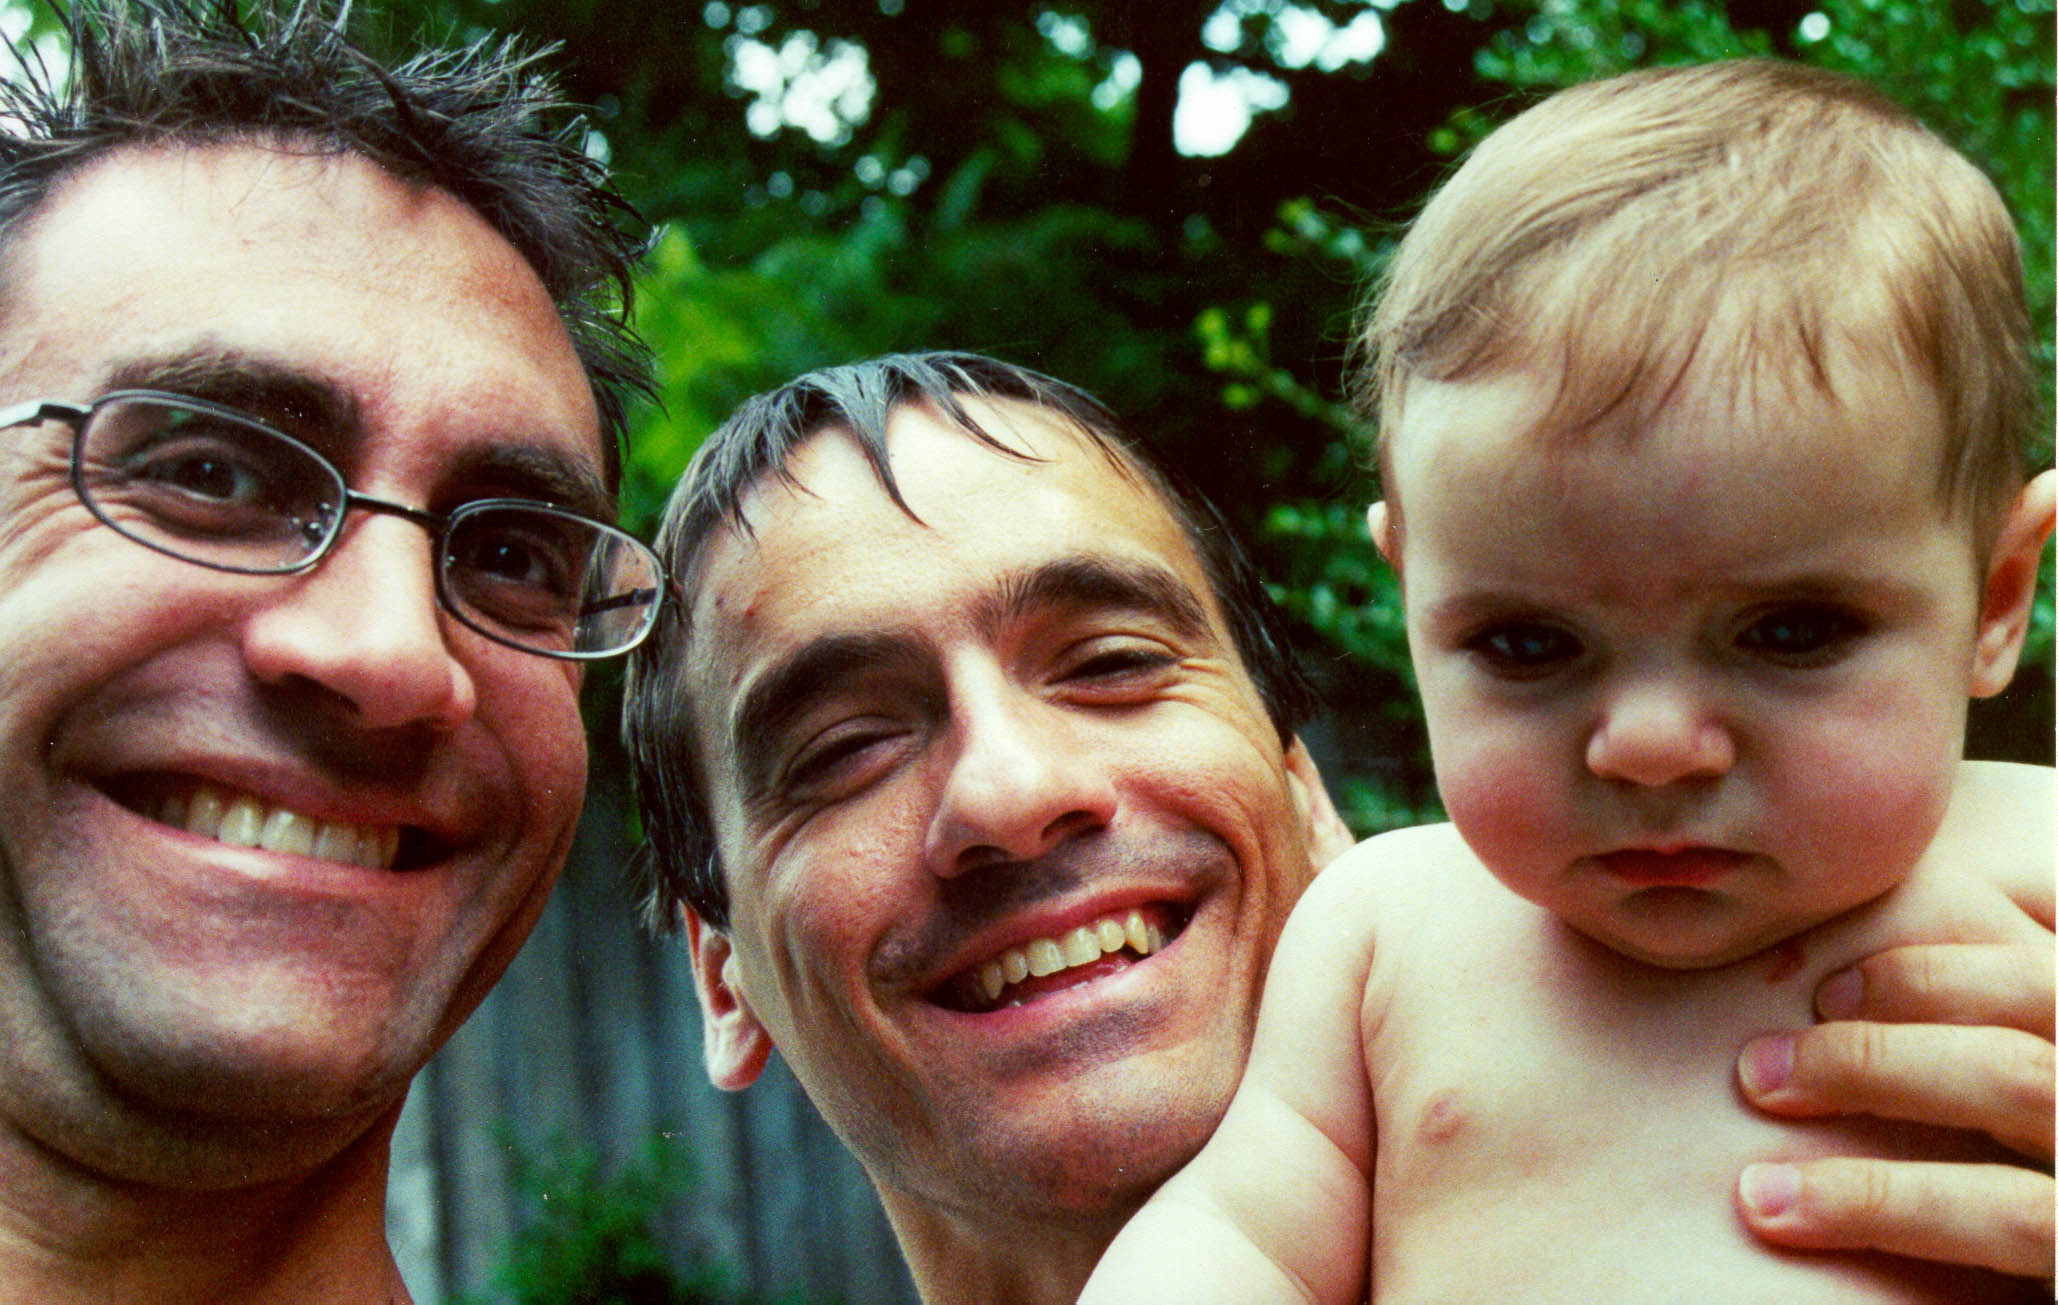 Malcolm, Michael Chiocca and baby Isabella Chiocca (Summer 2000) - pic37